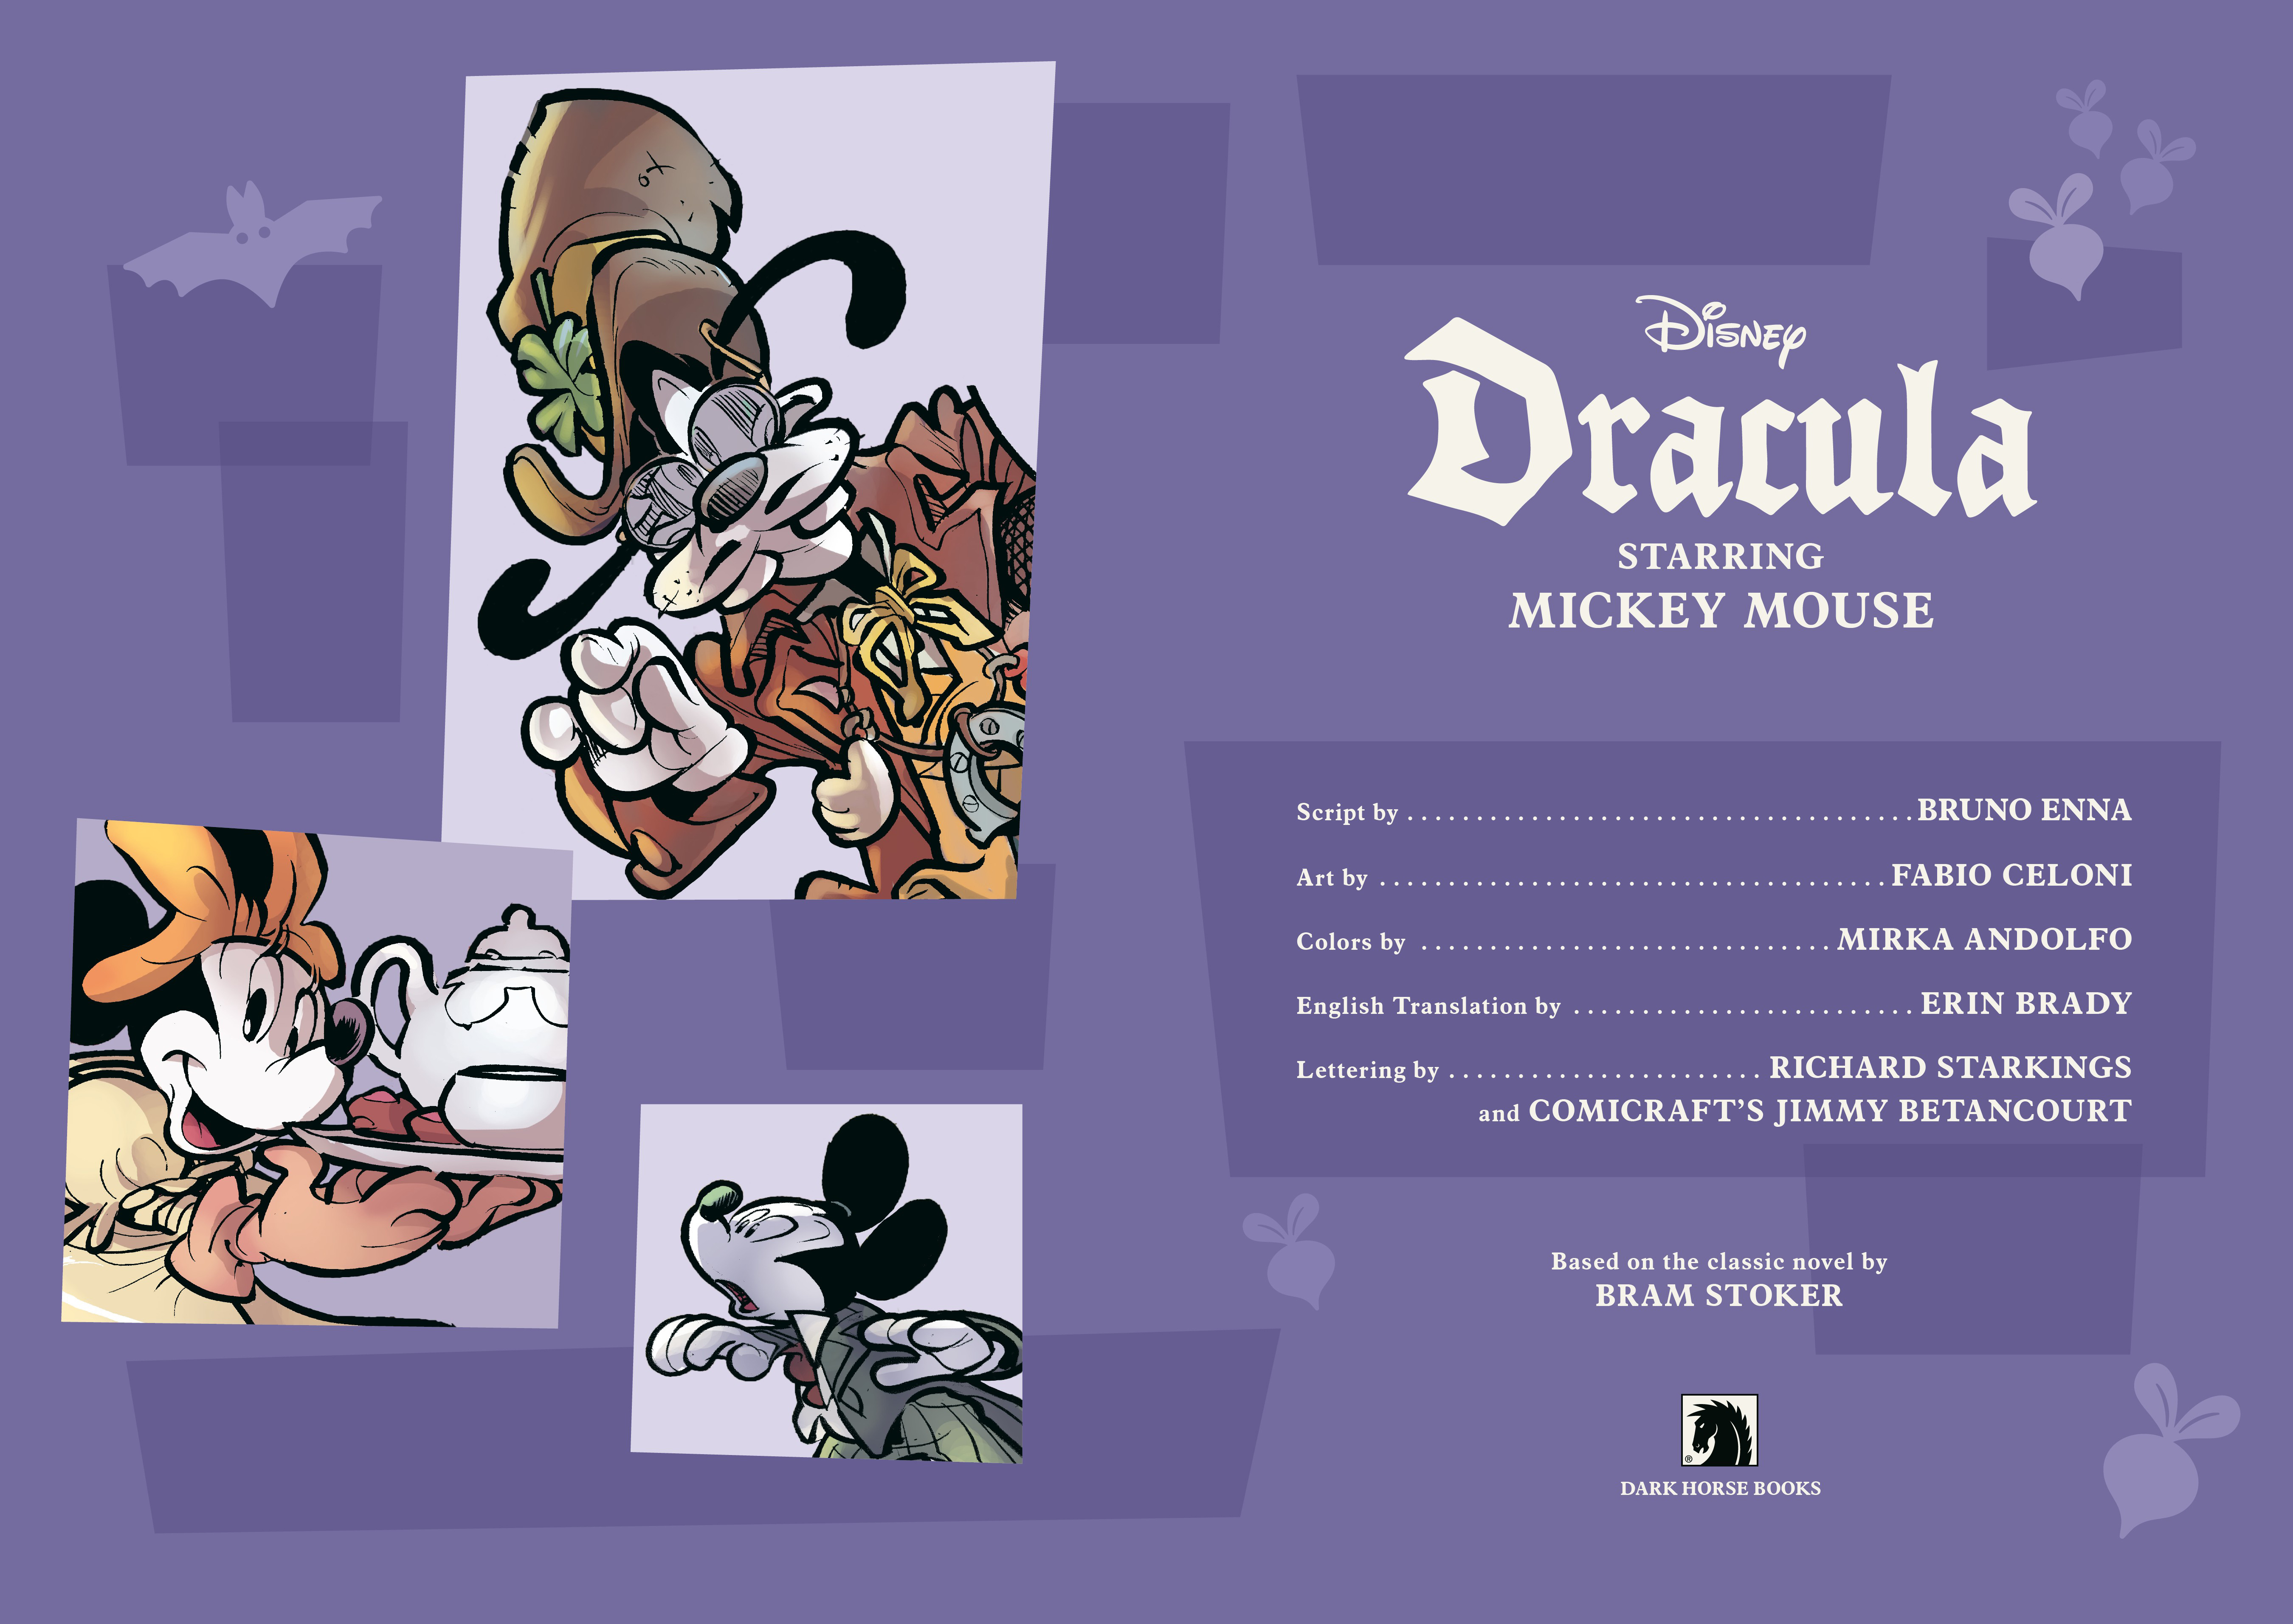 Read online Disney Dracula, Starring Mickey Mouse comic -  Issue # TPB - 3